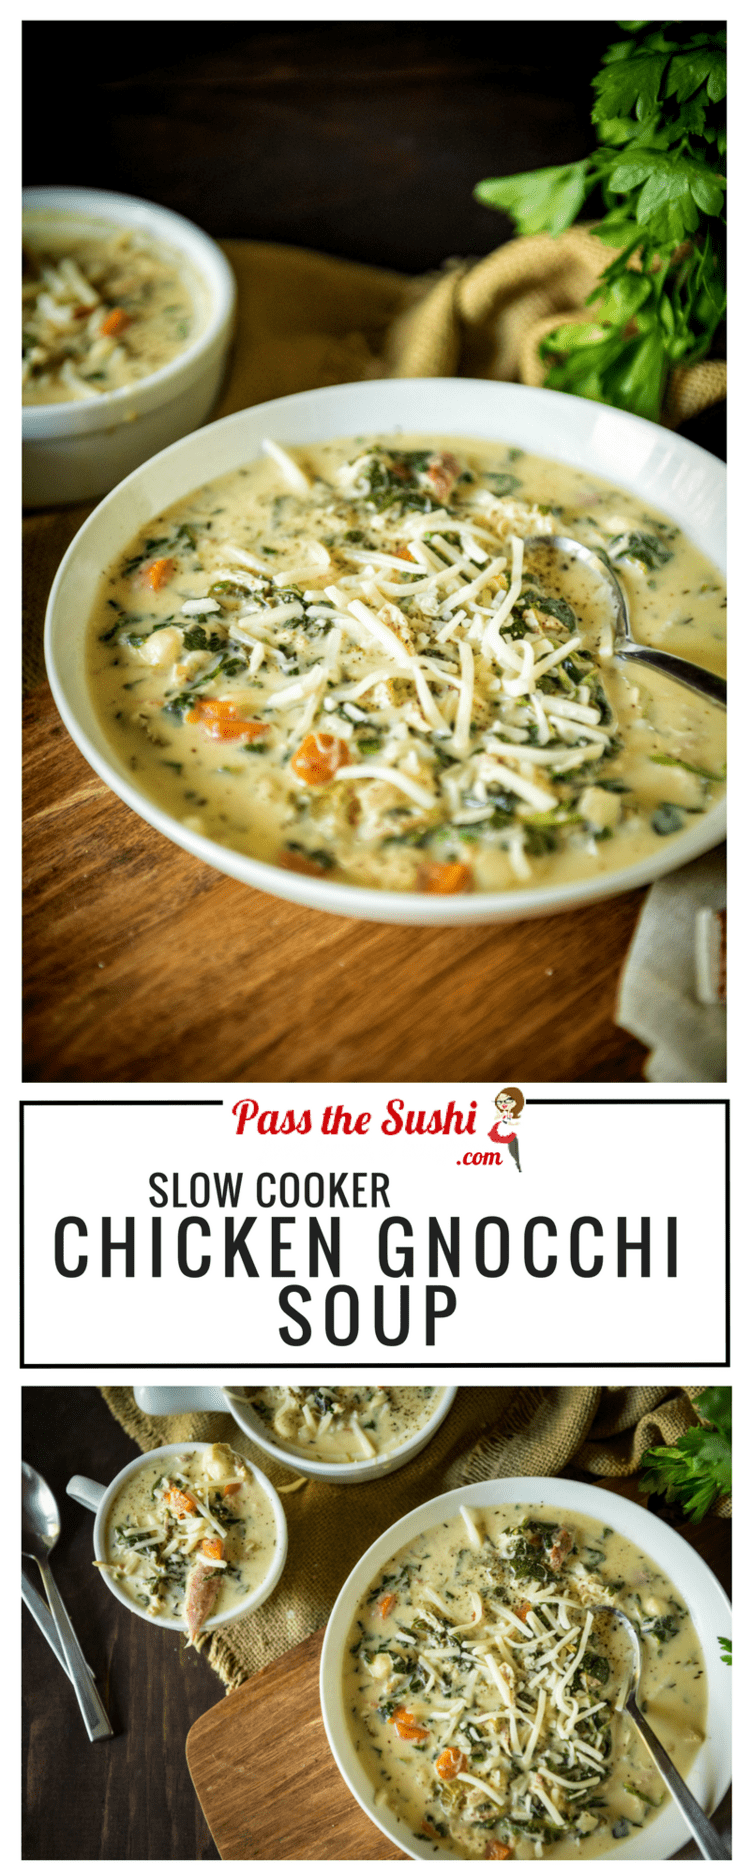 Perfect for leftovers, this slow cooker Chicken Gnocchi Soup is easy and so freaking delicious! Recipe at PasstheSushi.com